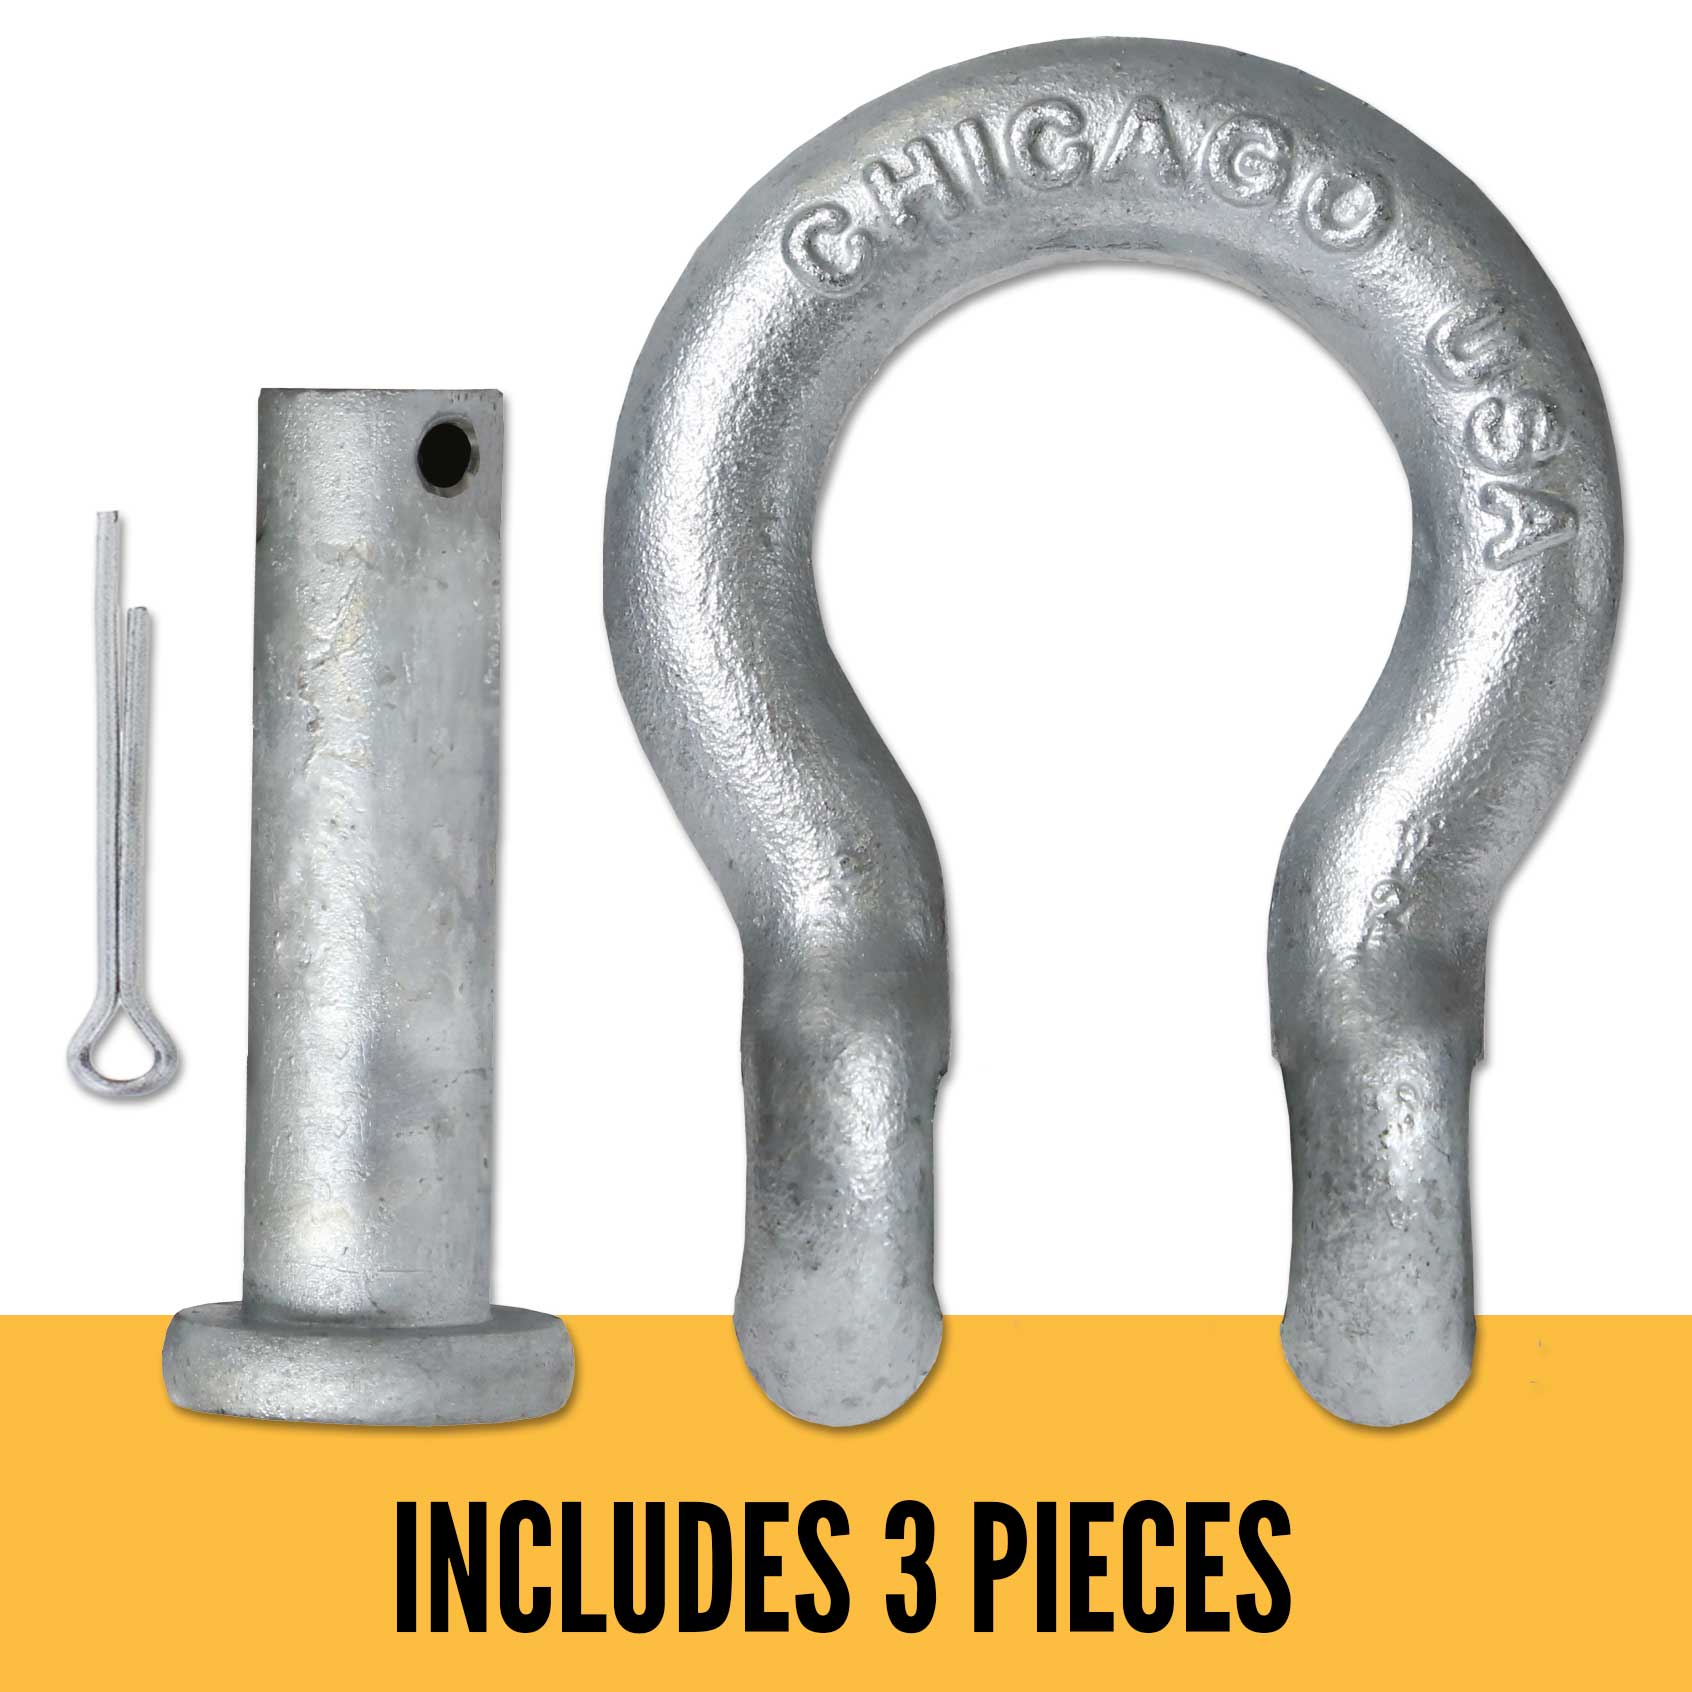 Anchor Shackle - Chicago Hardware - Round Pin - 1-1/4" Galvanized Steel - 12 Ton parts of a shackle